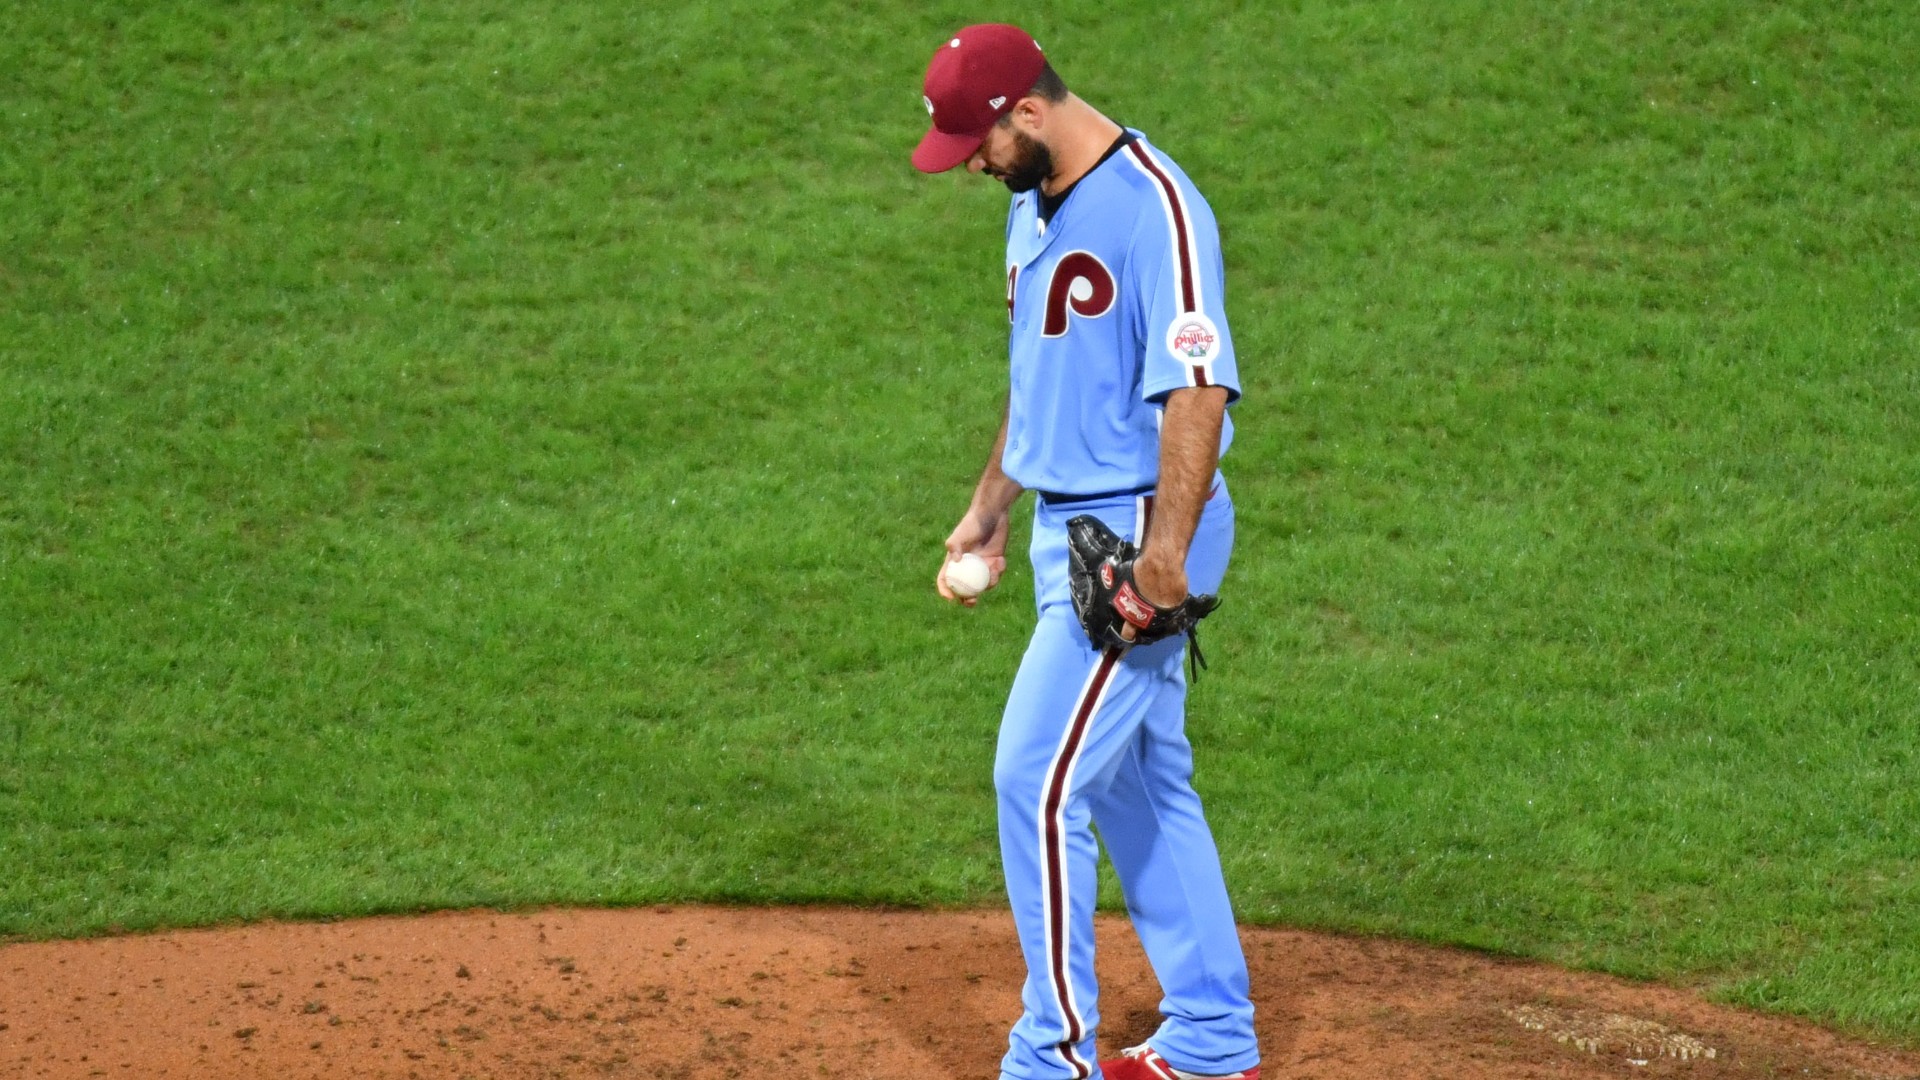 Phillies' Bullpen on Pace to Join Dubious Company With ERA Over 7.00